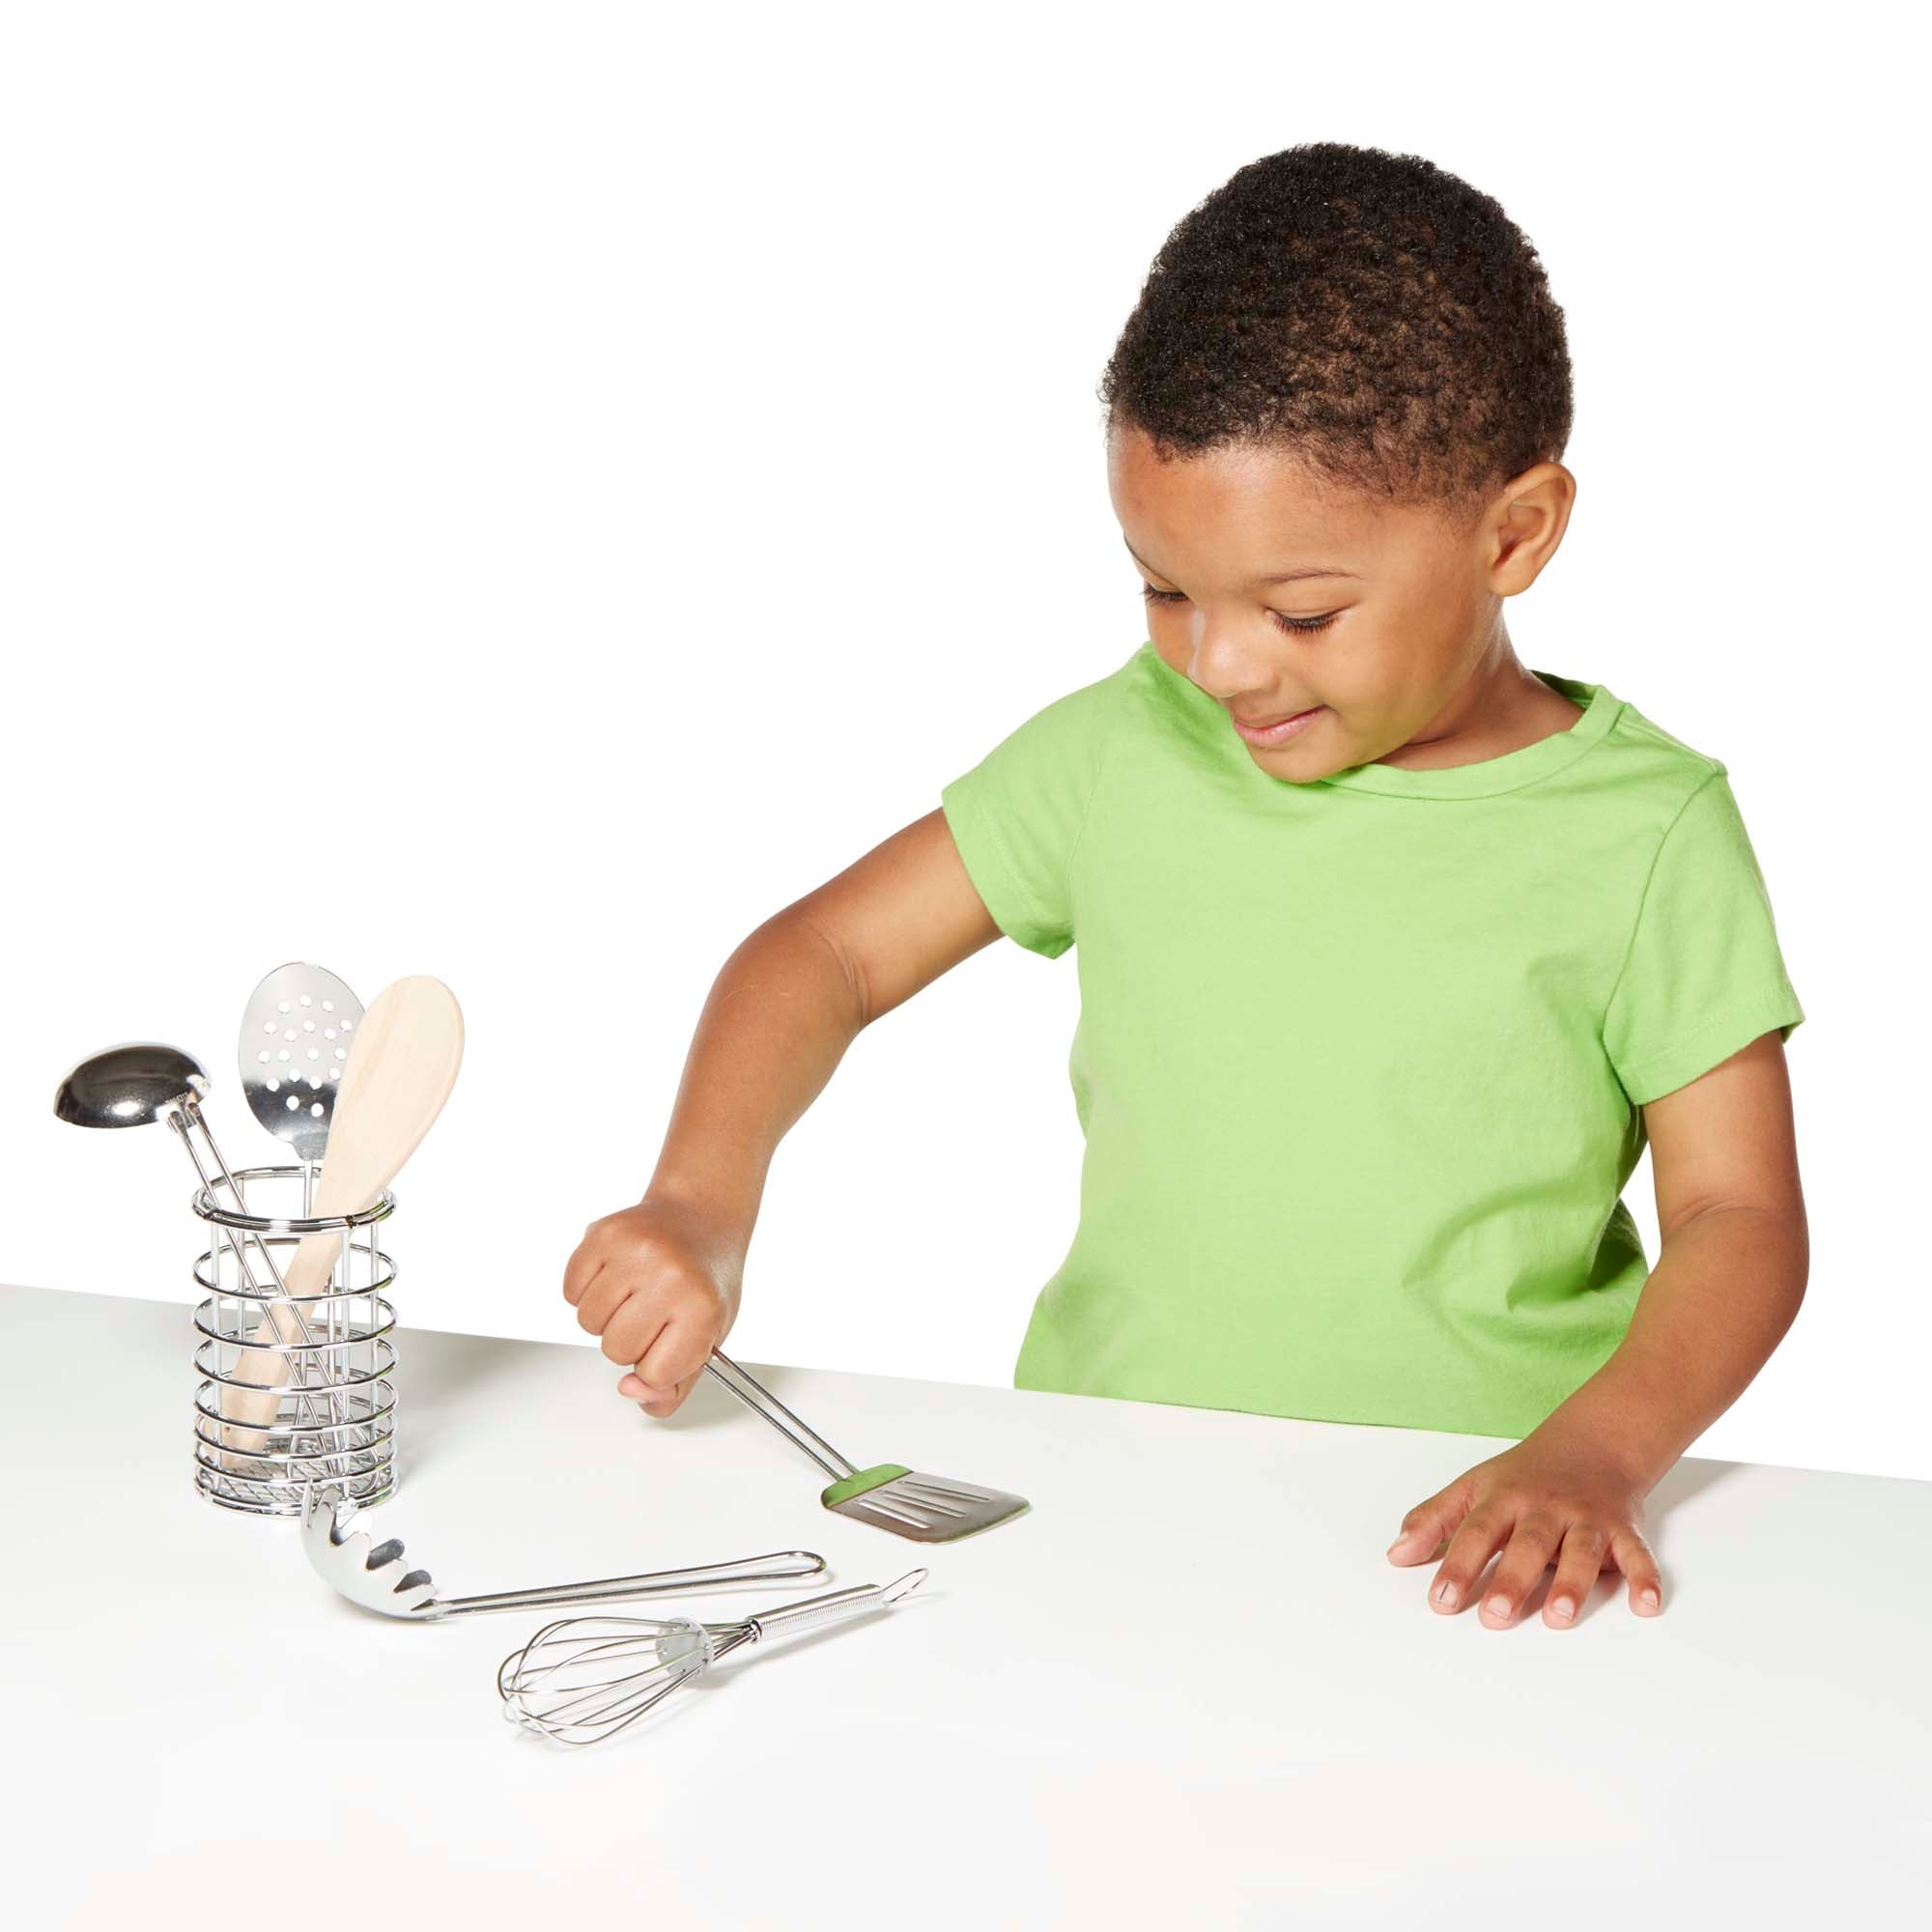 Melissa and Doug Let's Play House! Stir & Serve Cooking Utensils